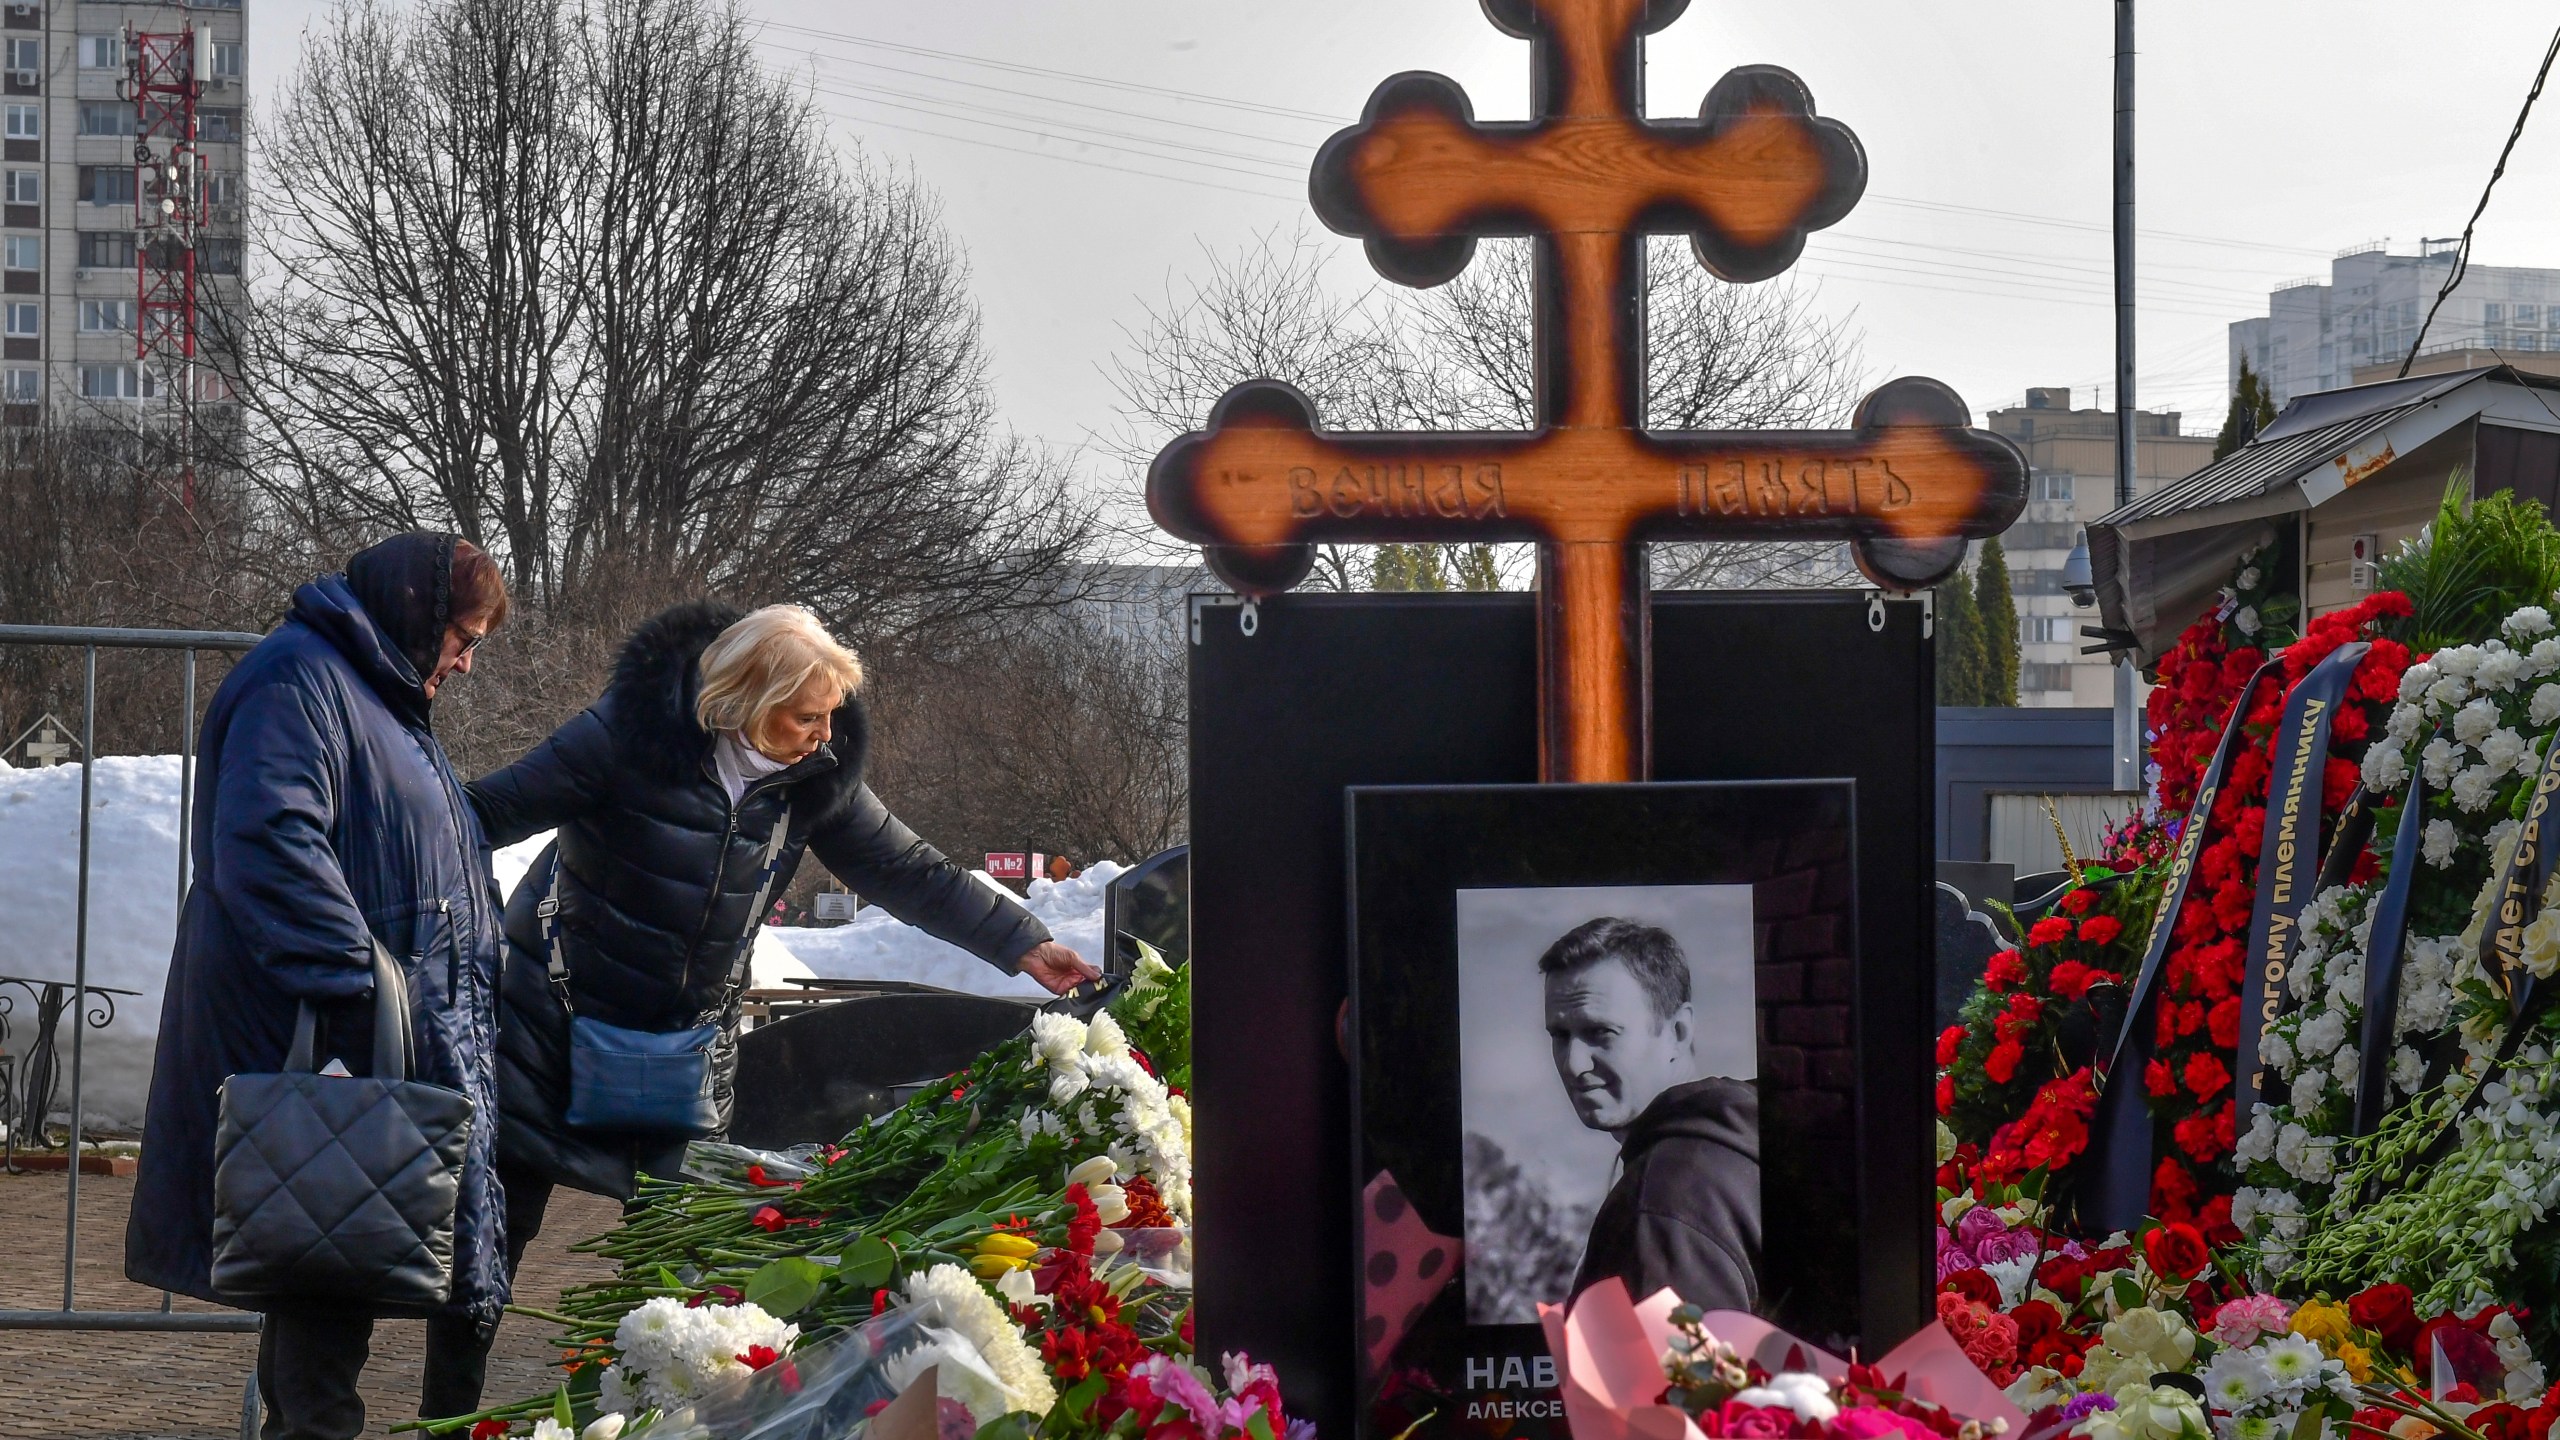 Russian opposition leader Alexei Navalny's mother, Lyudmila Navalnaya, left, and his mother-in-law, no name available, visit the grave of Alexei Navalny after his yesterday funeral at the Borisovskoye Cemetery, in Moscow, Russia, on Saturday, March 2, 2024. Navalny, who was President Vladimir Putin's fiercest foe, was buried after a funeral that drew thousands of mourners amid a heavy police presence. (AP Photo)